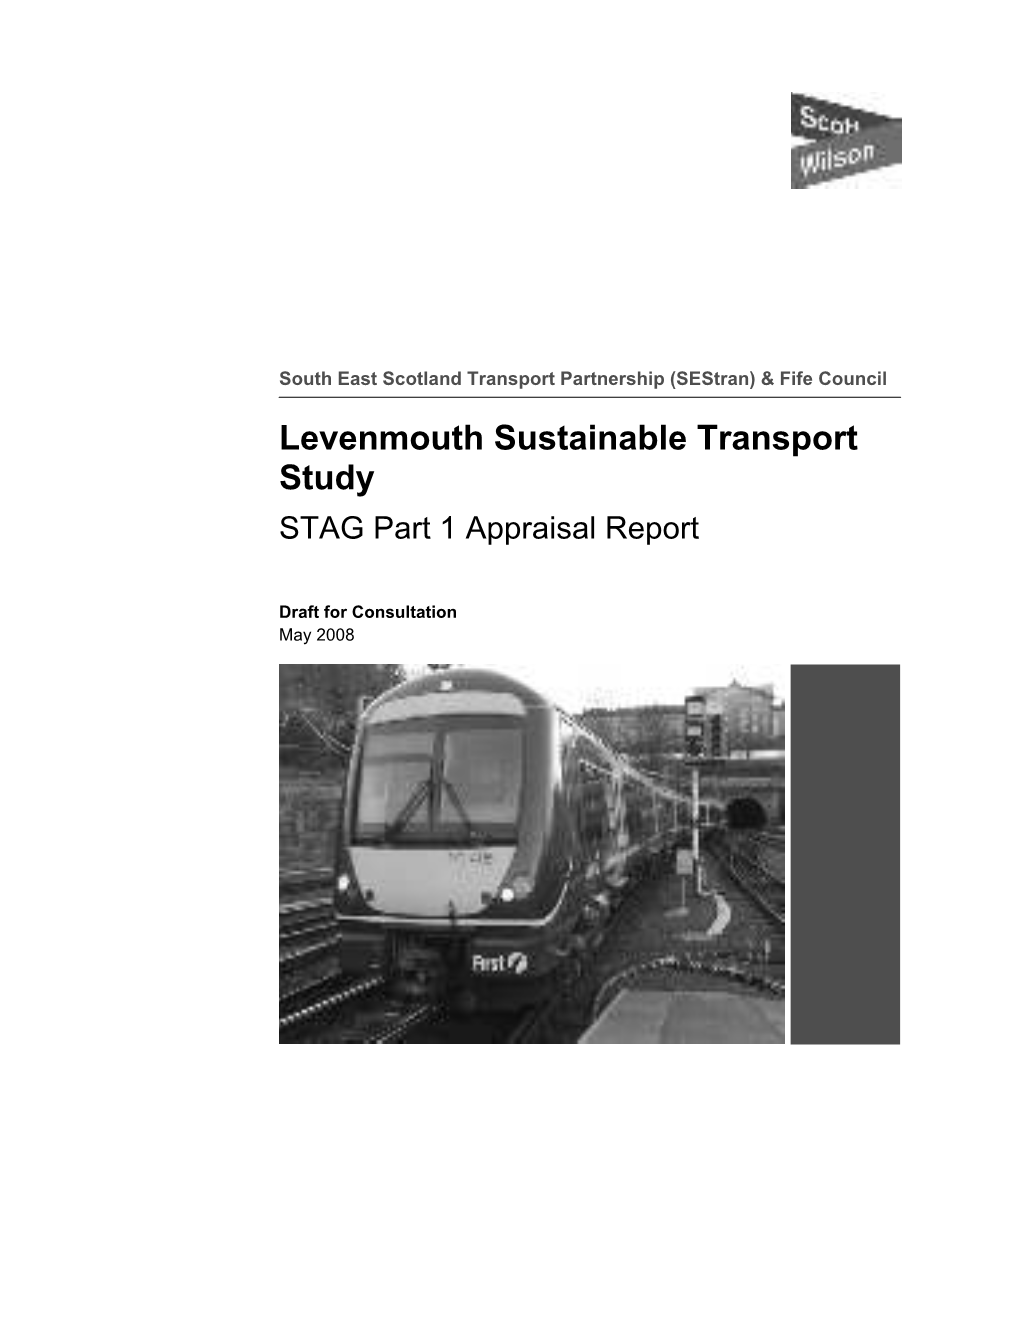 Levenmouth Sustainable Transport Study STAG Part 1 Appraisal Report